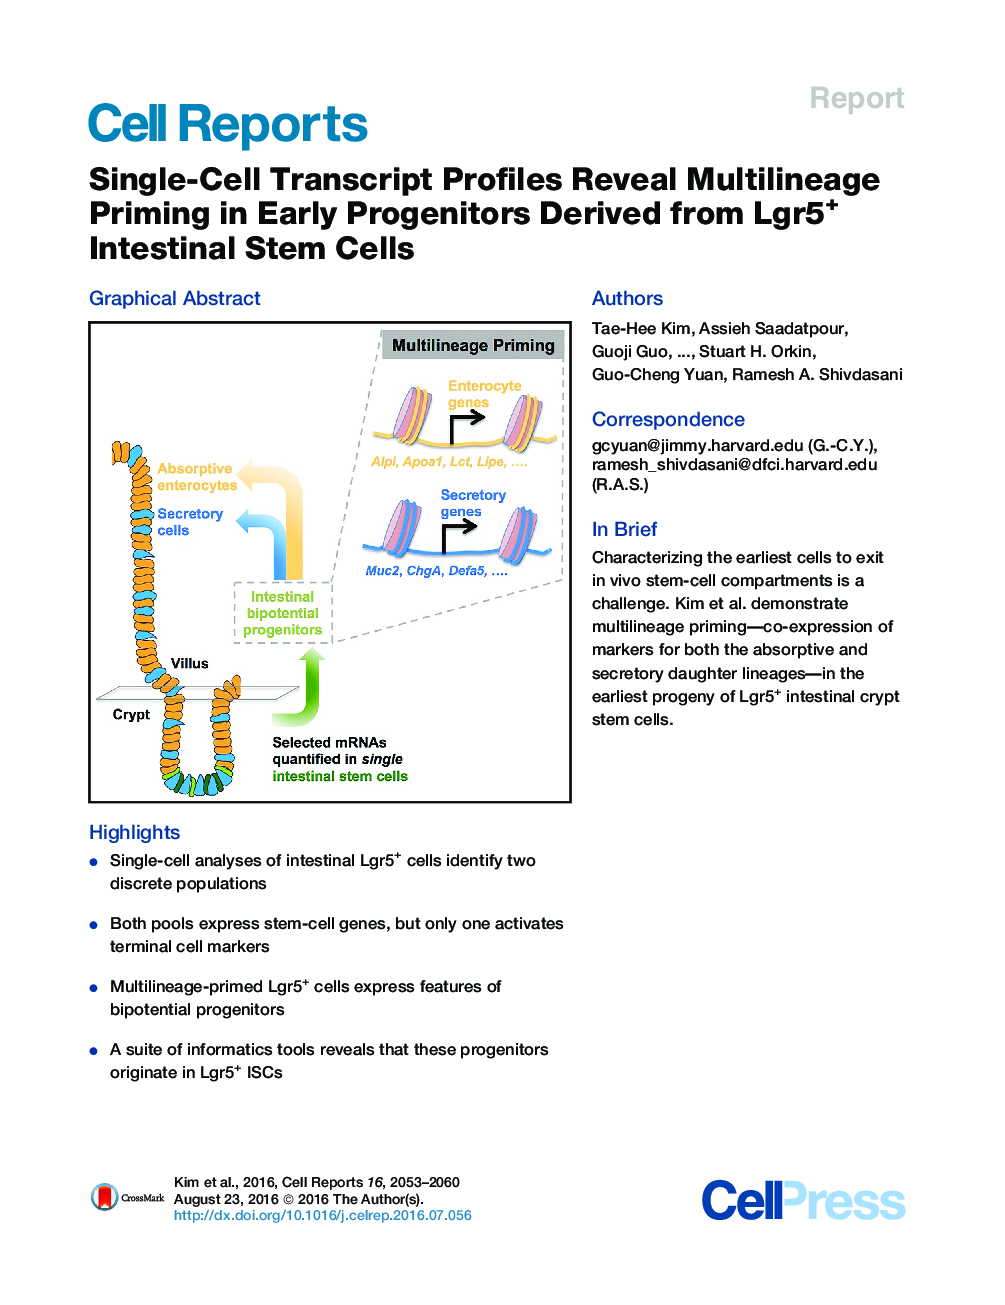 Single-Cell Transcript Profiles Reveal Multilineage Priming in Early Progenitors Derived from Lgr5+ Intestinal Stem Cells